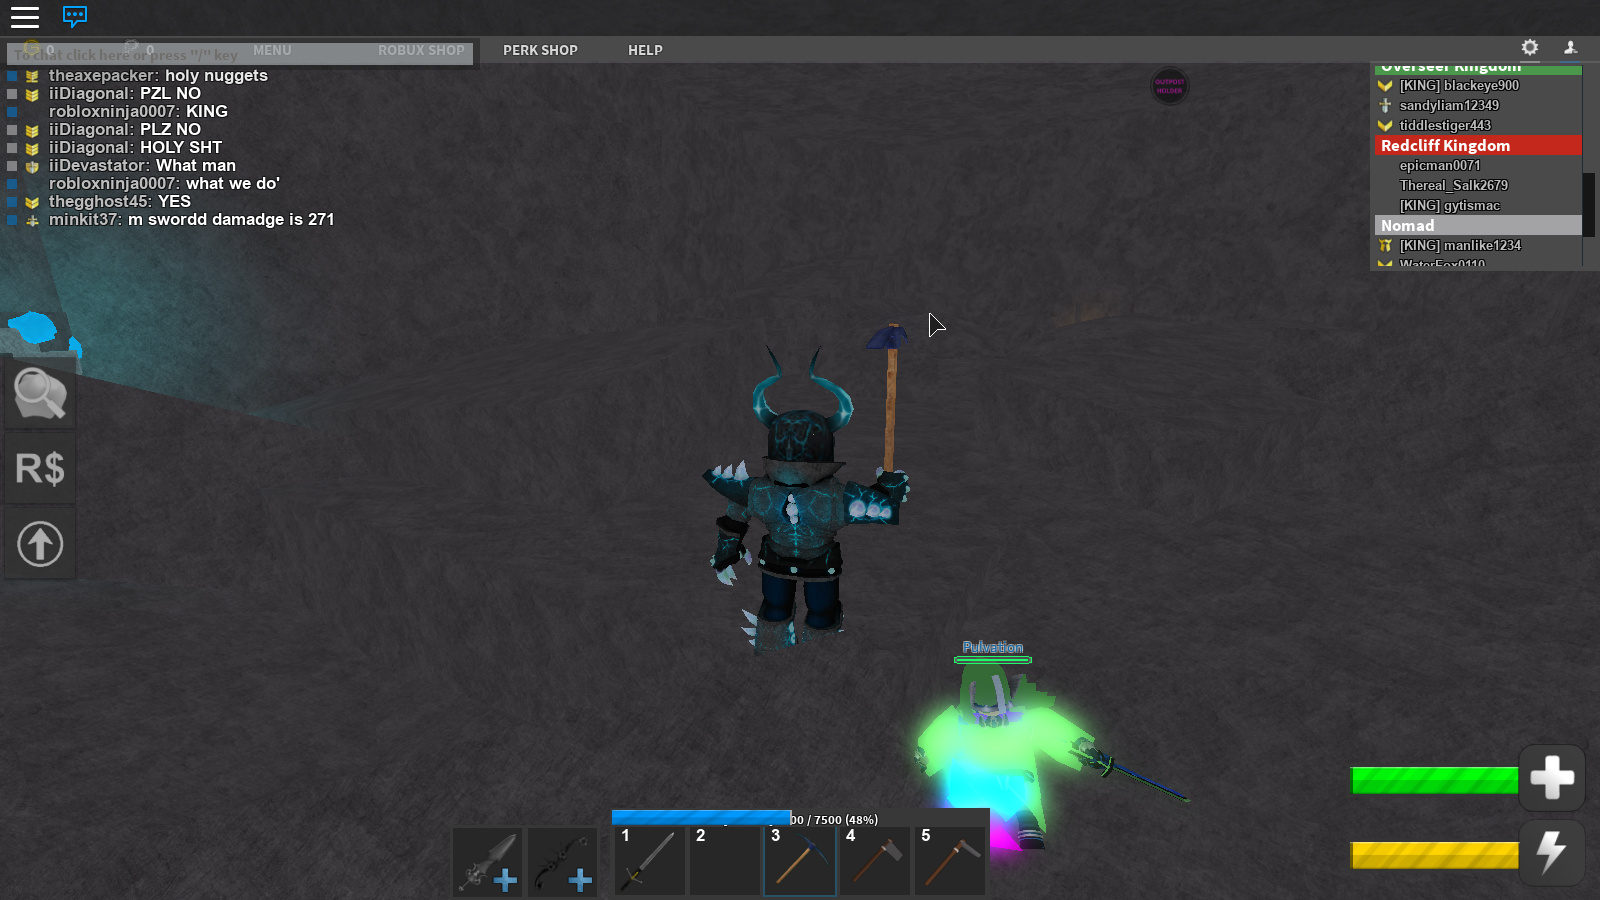 Hackers Names And Images Roblox Medieval Warfare Reforged Wiki Fandom - roblox hackers names 2020